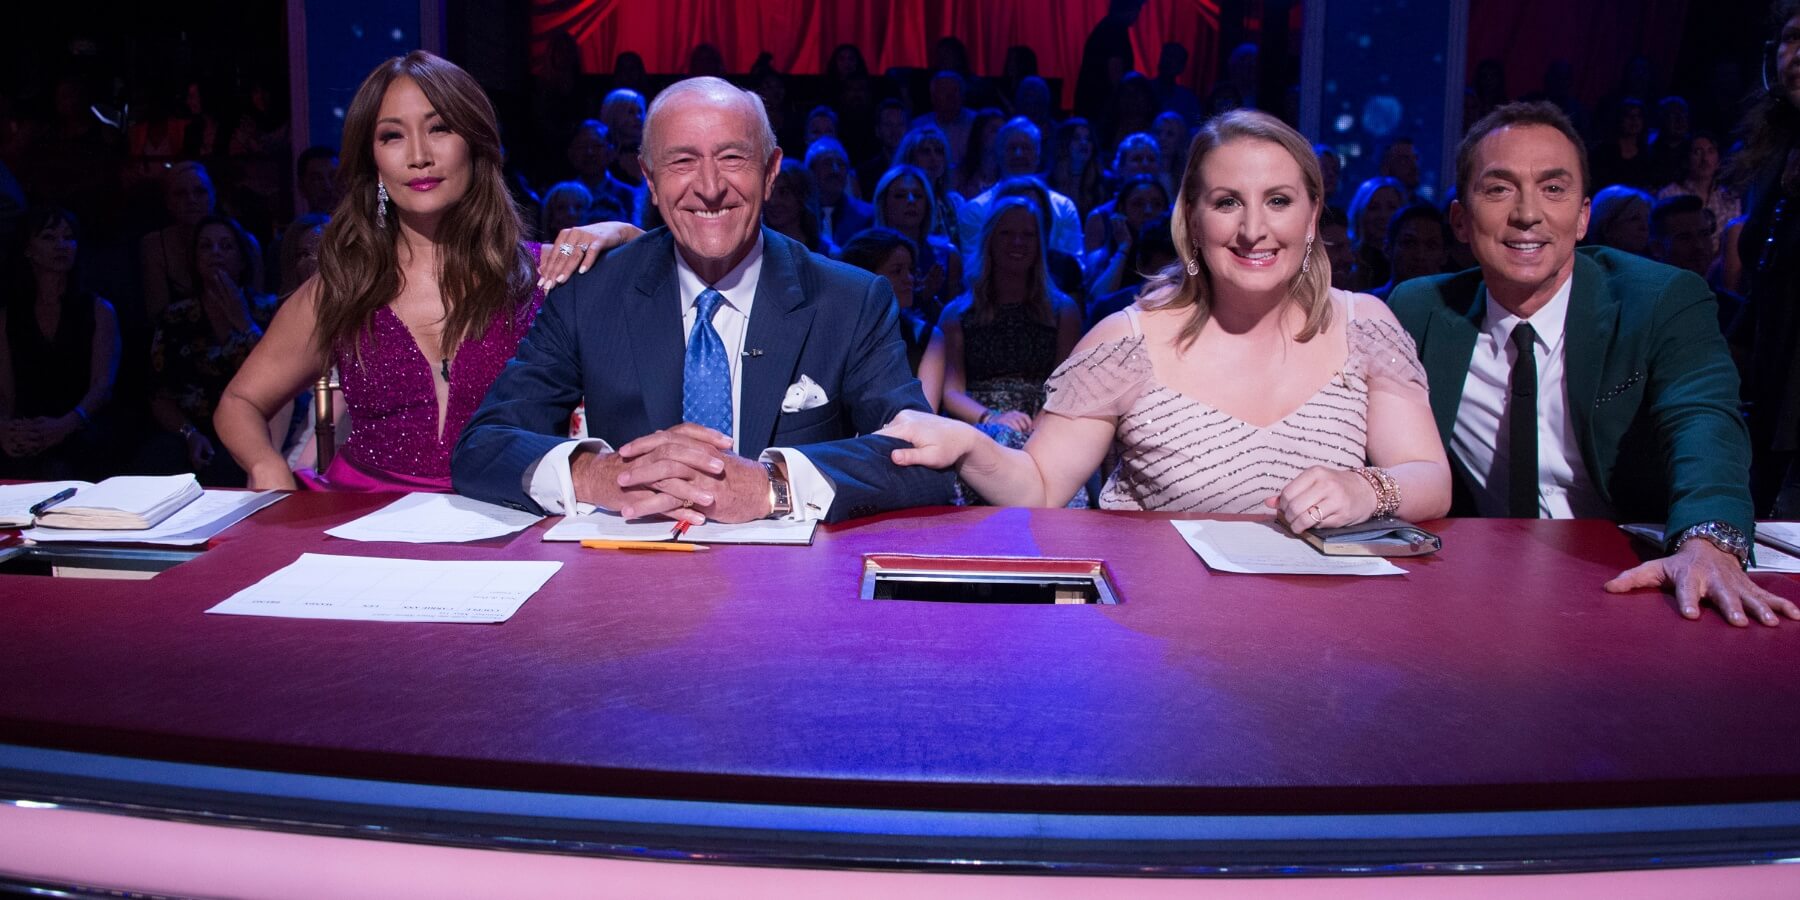 Carrie Ann Inaba, Len Goodman, Mandy Moore and Bruno Tonioli during 'Dancing with the Stars' season 24.